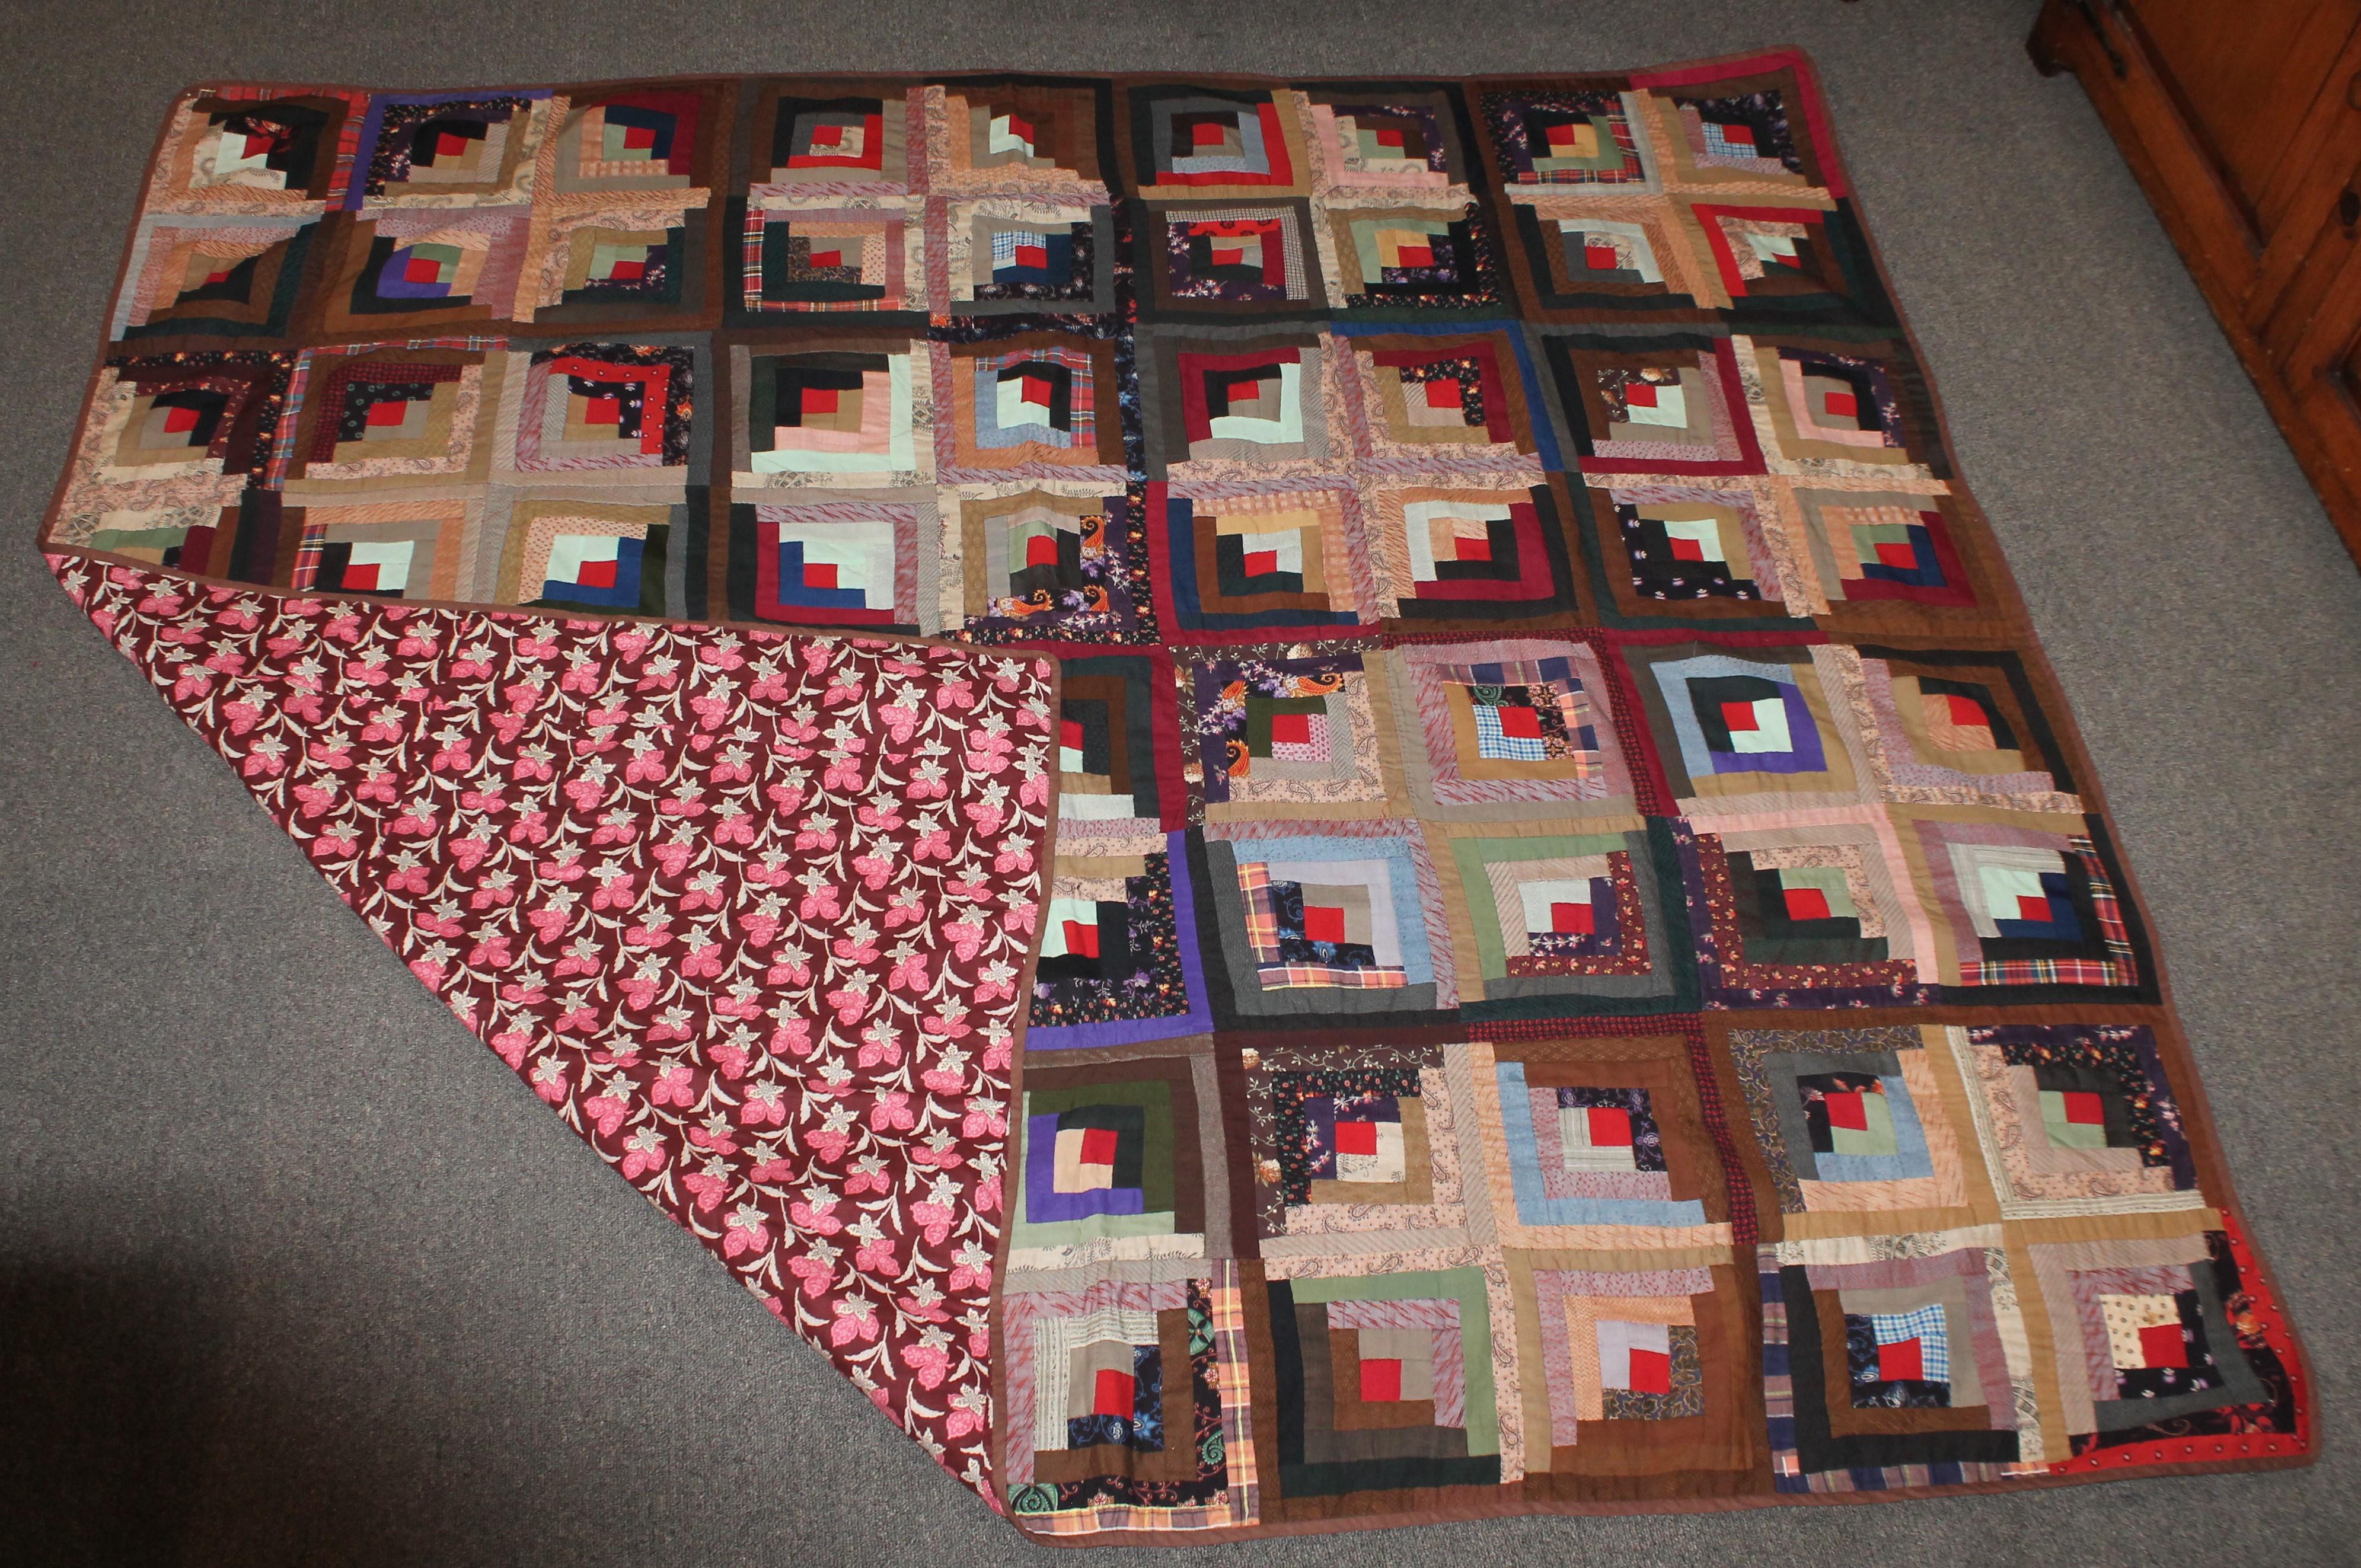 This 19th century wool challis log cabin / barn raising pattern quilt is in fine condition. Very nice piece work and quilting. The condition is pristine.